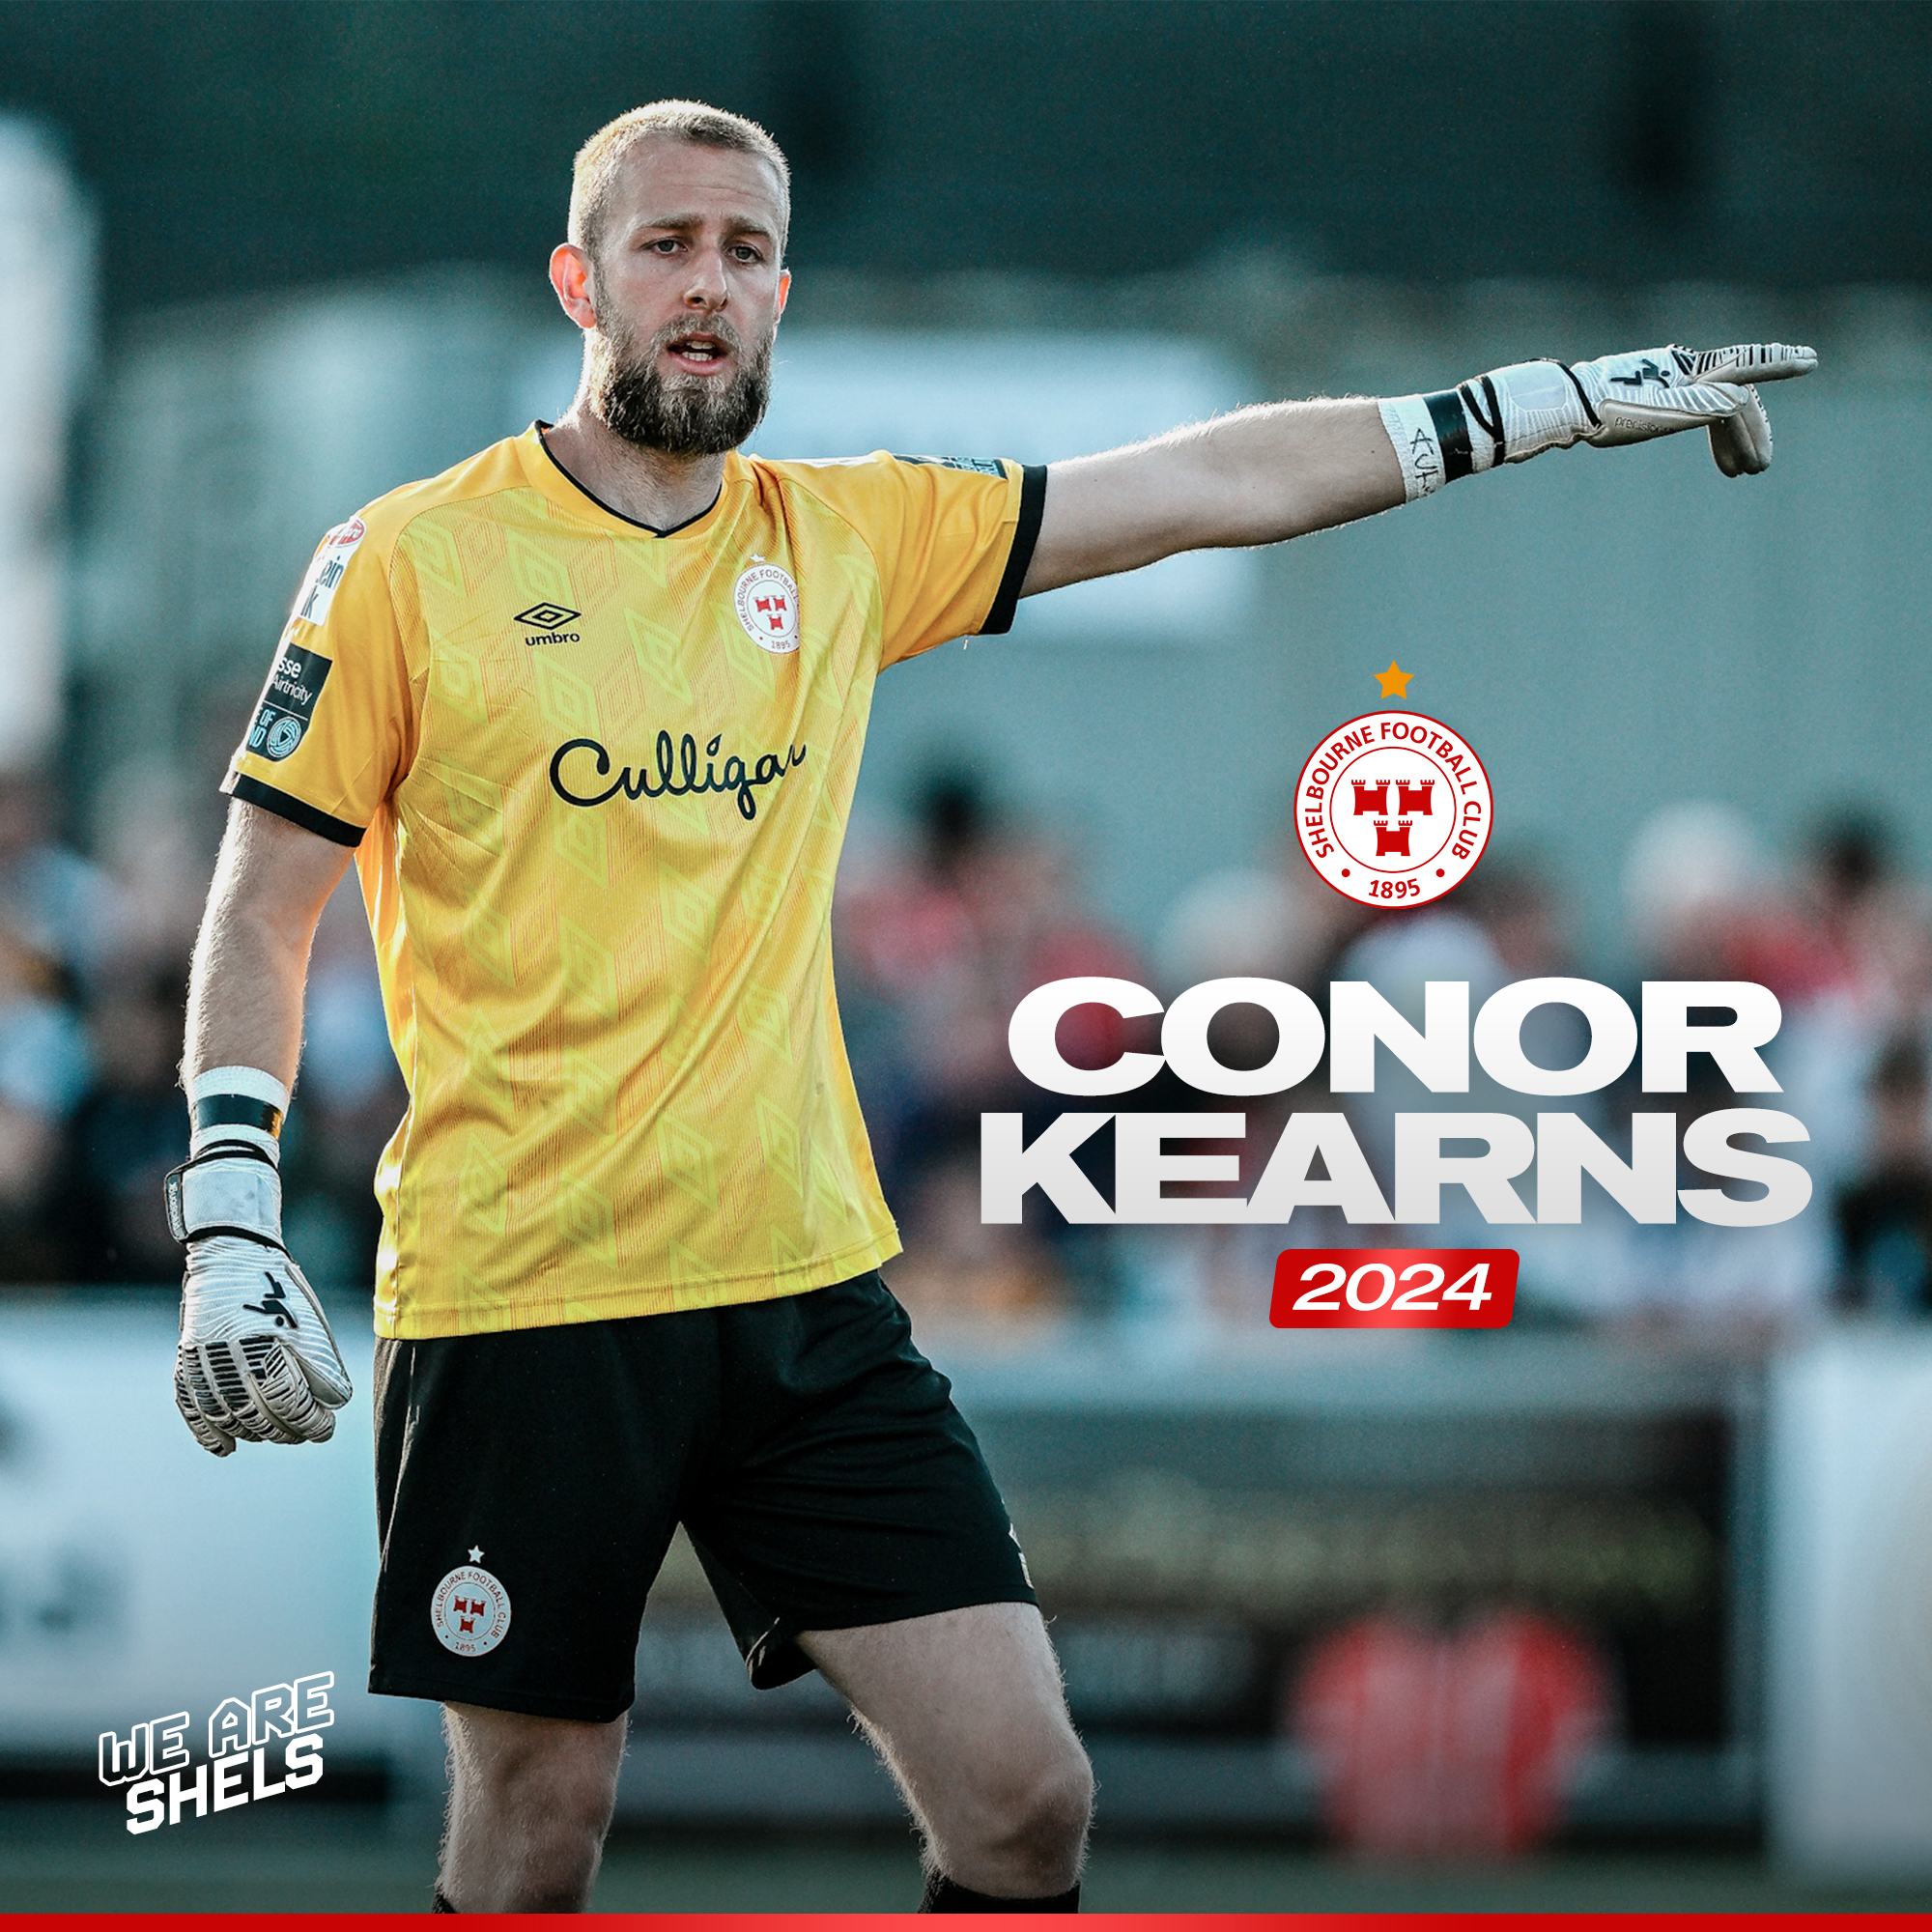 Conor Kearns commits to the Reds